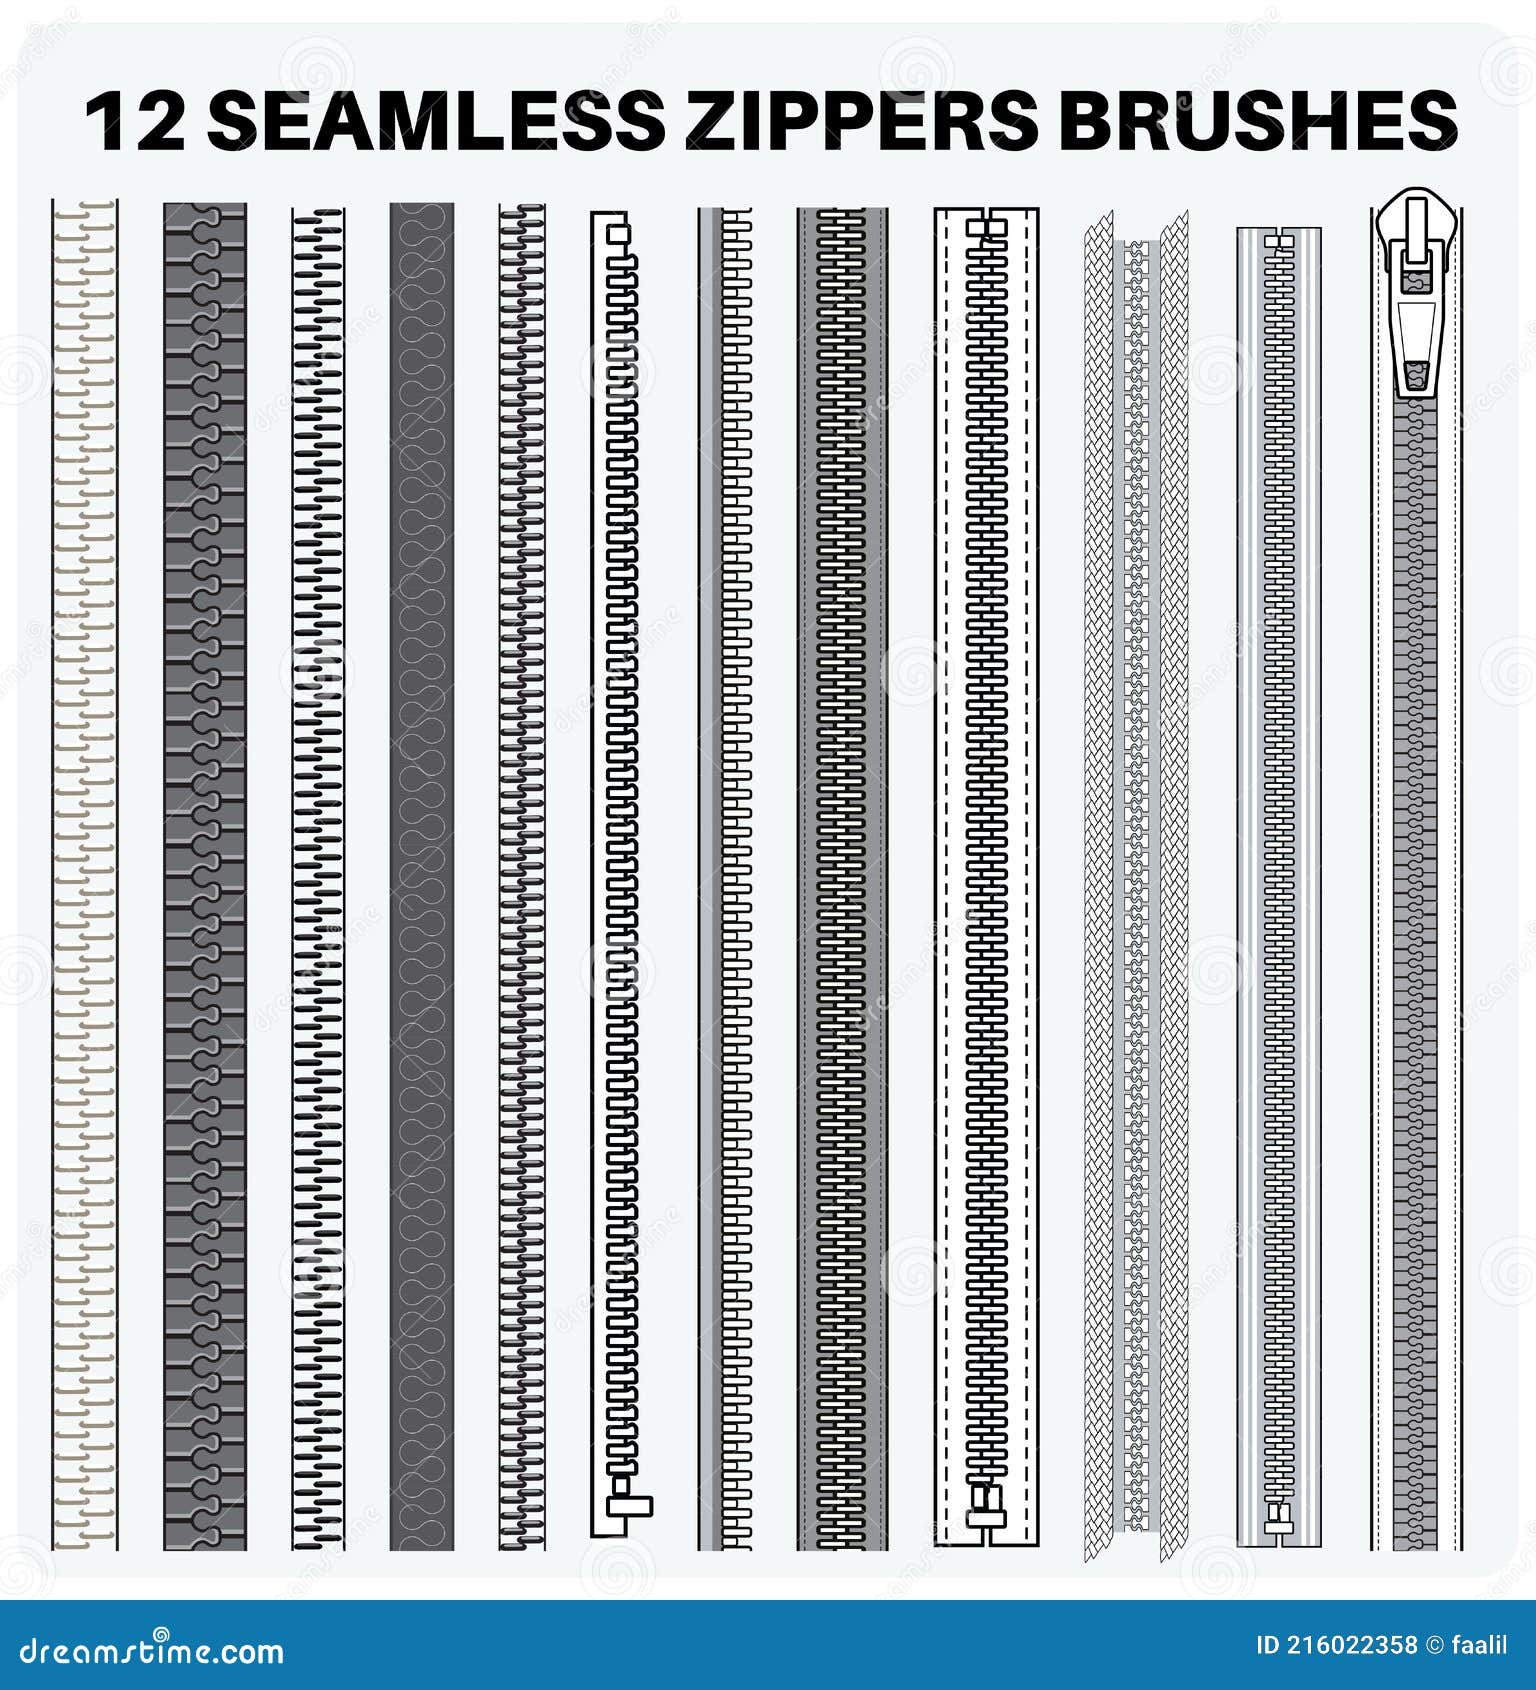 Seamless Zippers with Puller Flat Sketch Vector Illustrator Brush Set, Different Types of Zip for Fasteners, Dresses Stock Vector - Illustration of sketch, pulls: 216022358